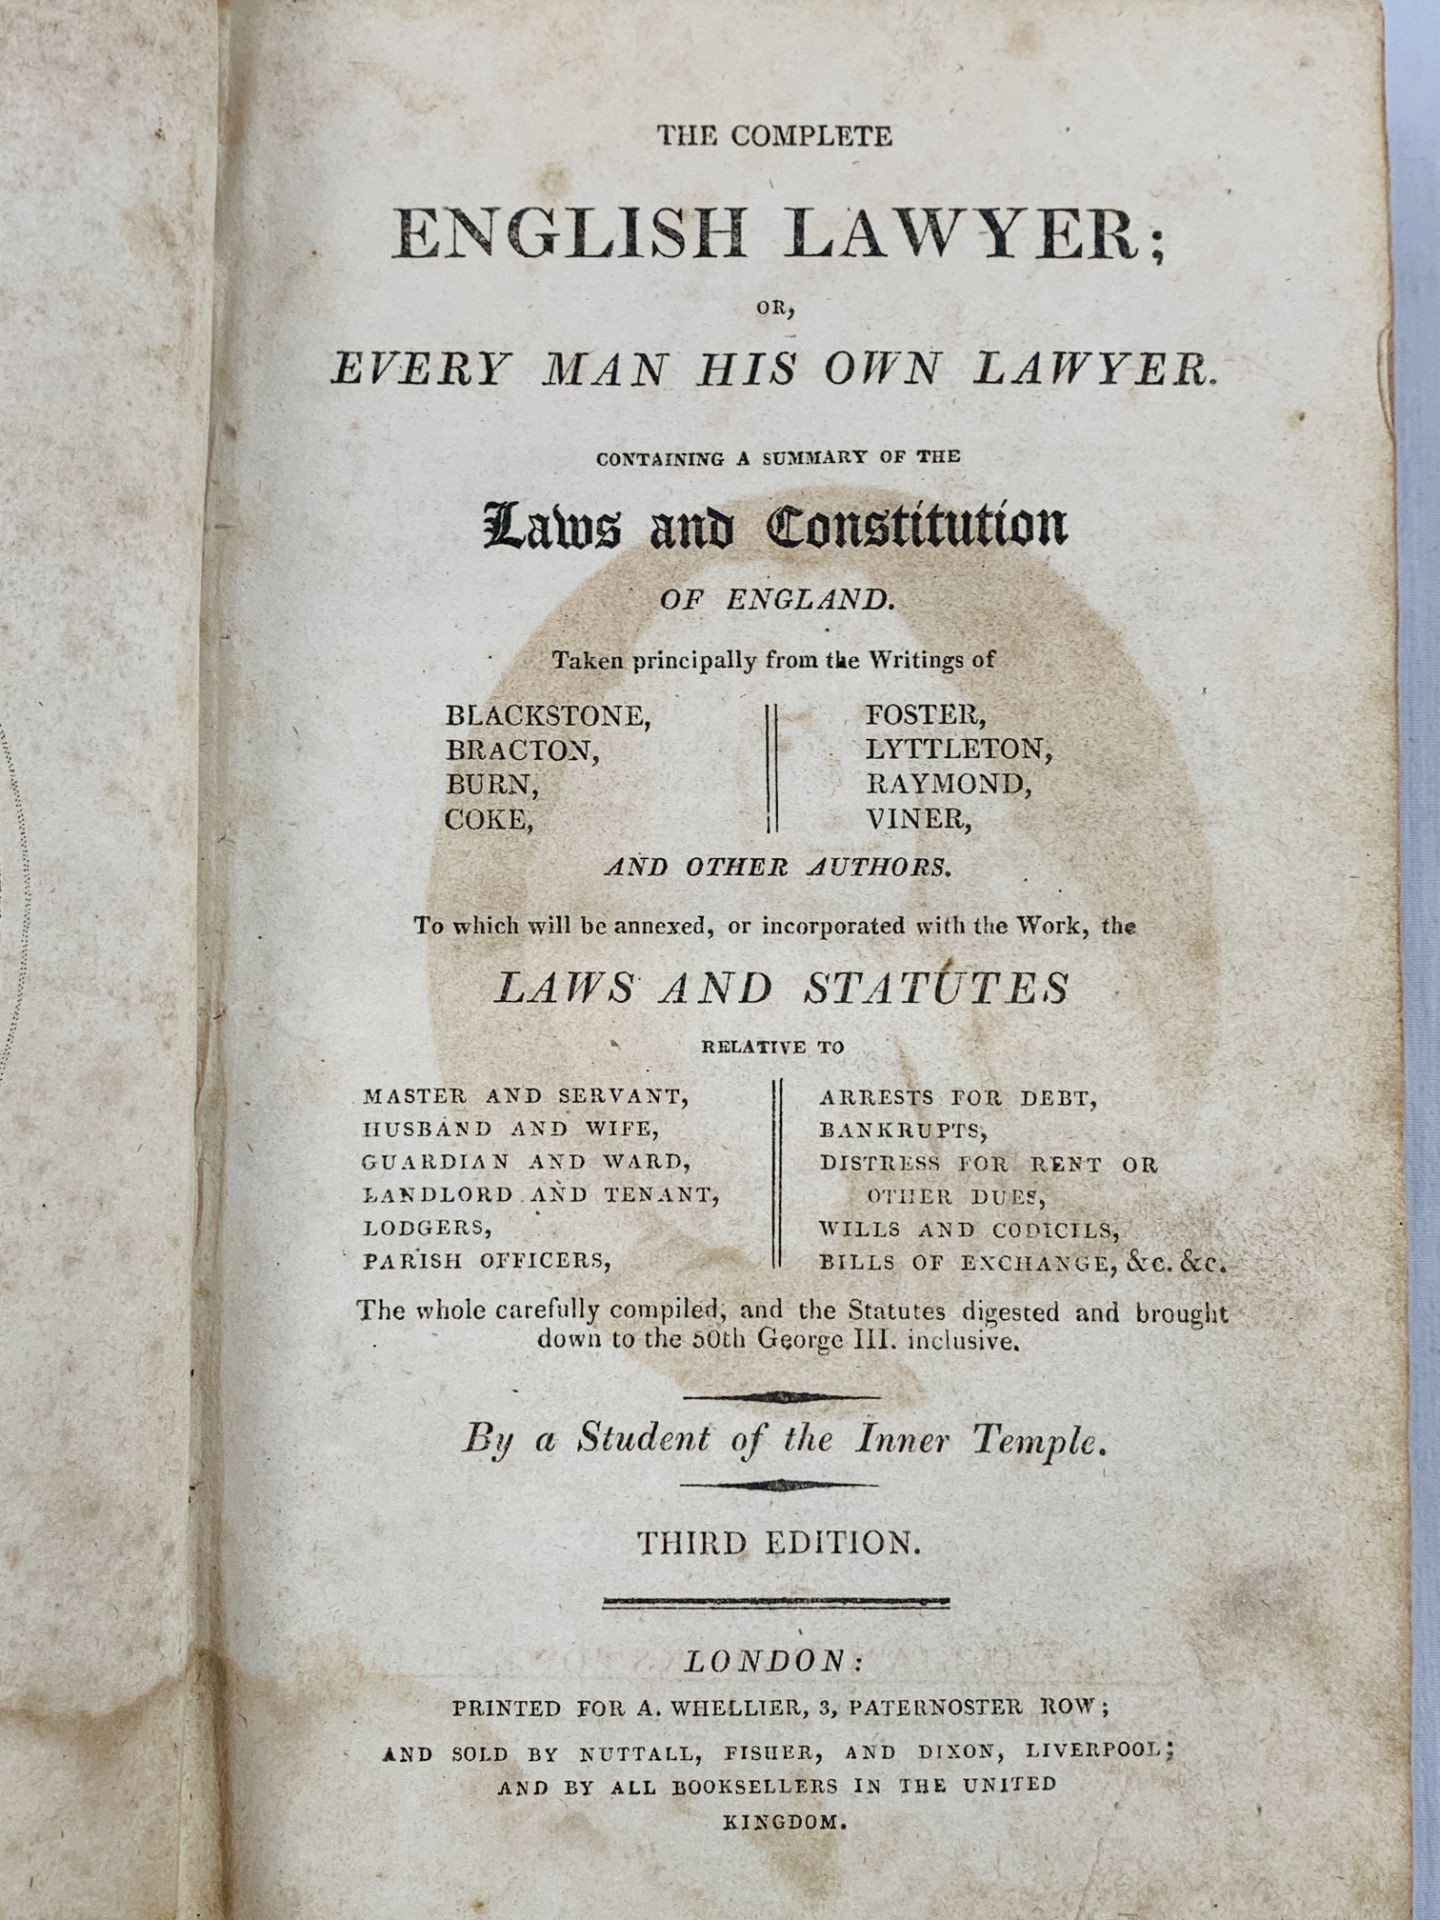 The Complete English and Irish Lawyer; by John Gifford circ 1820. - Image 2 of 4